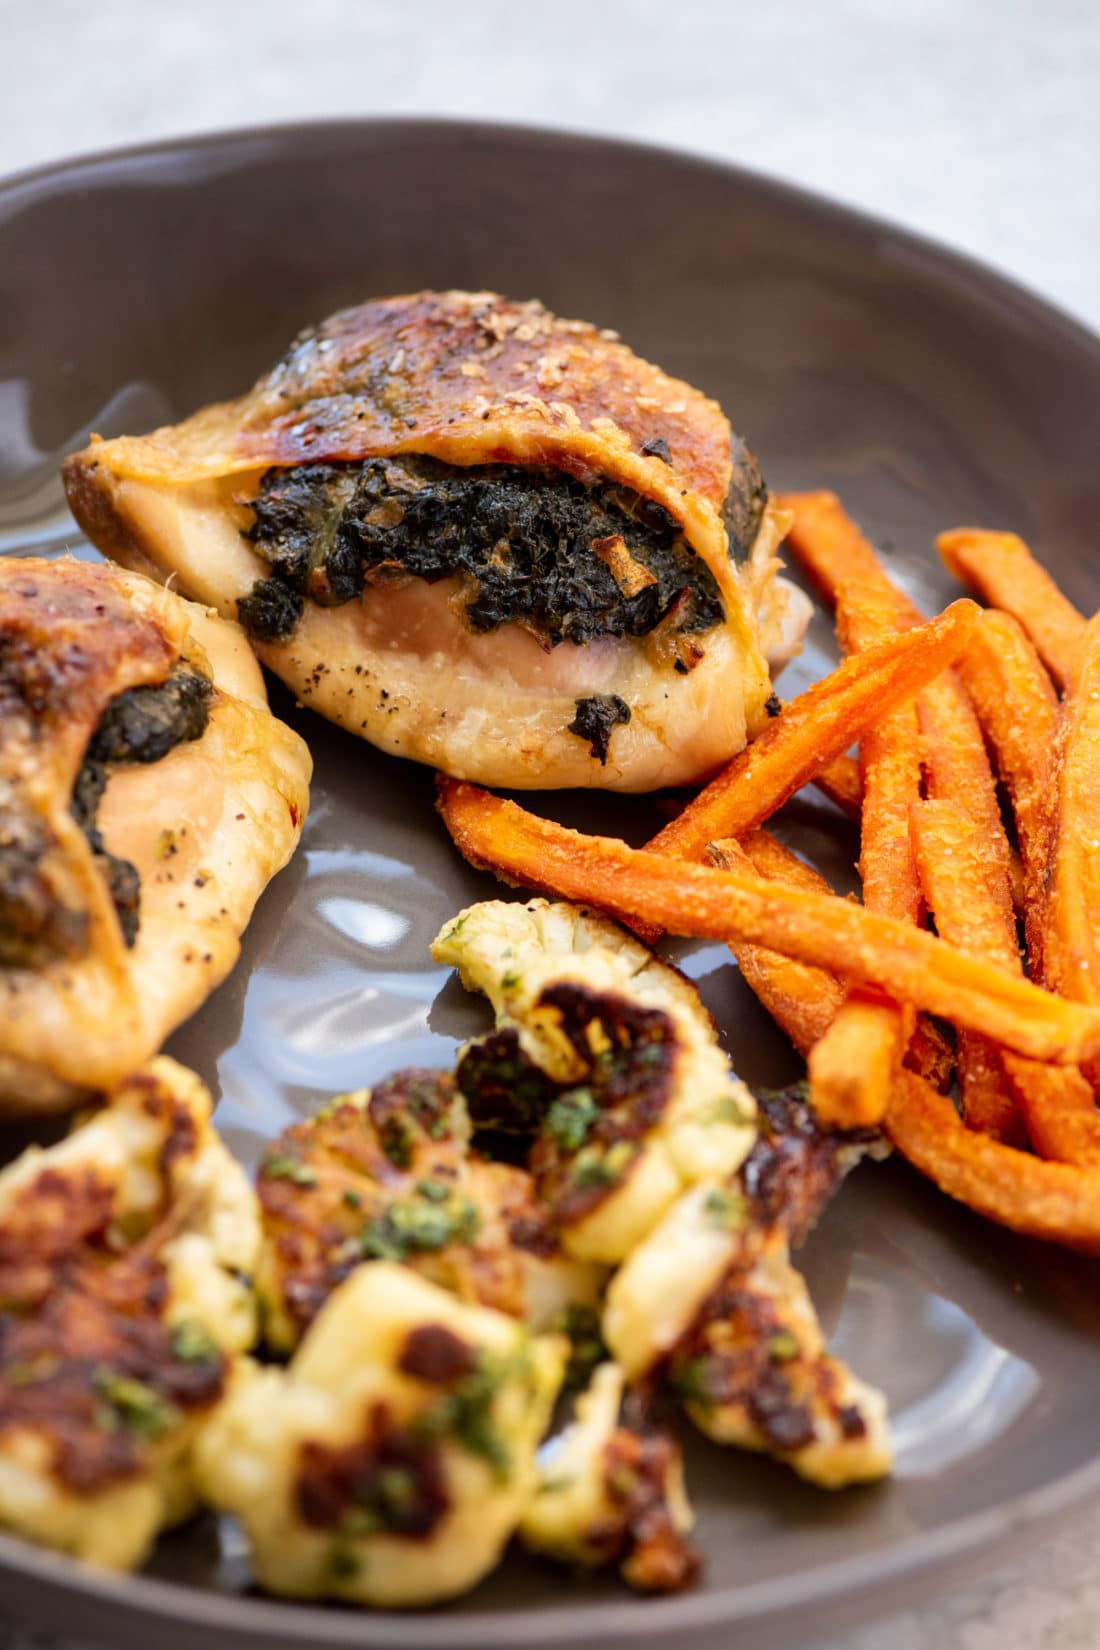 Plate of sweet potato fries, cauliflower, and Creamed Spinach Stuffed Chicken Thighs.